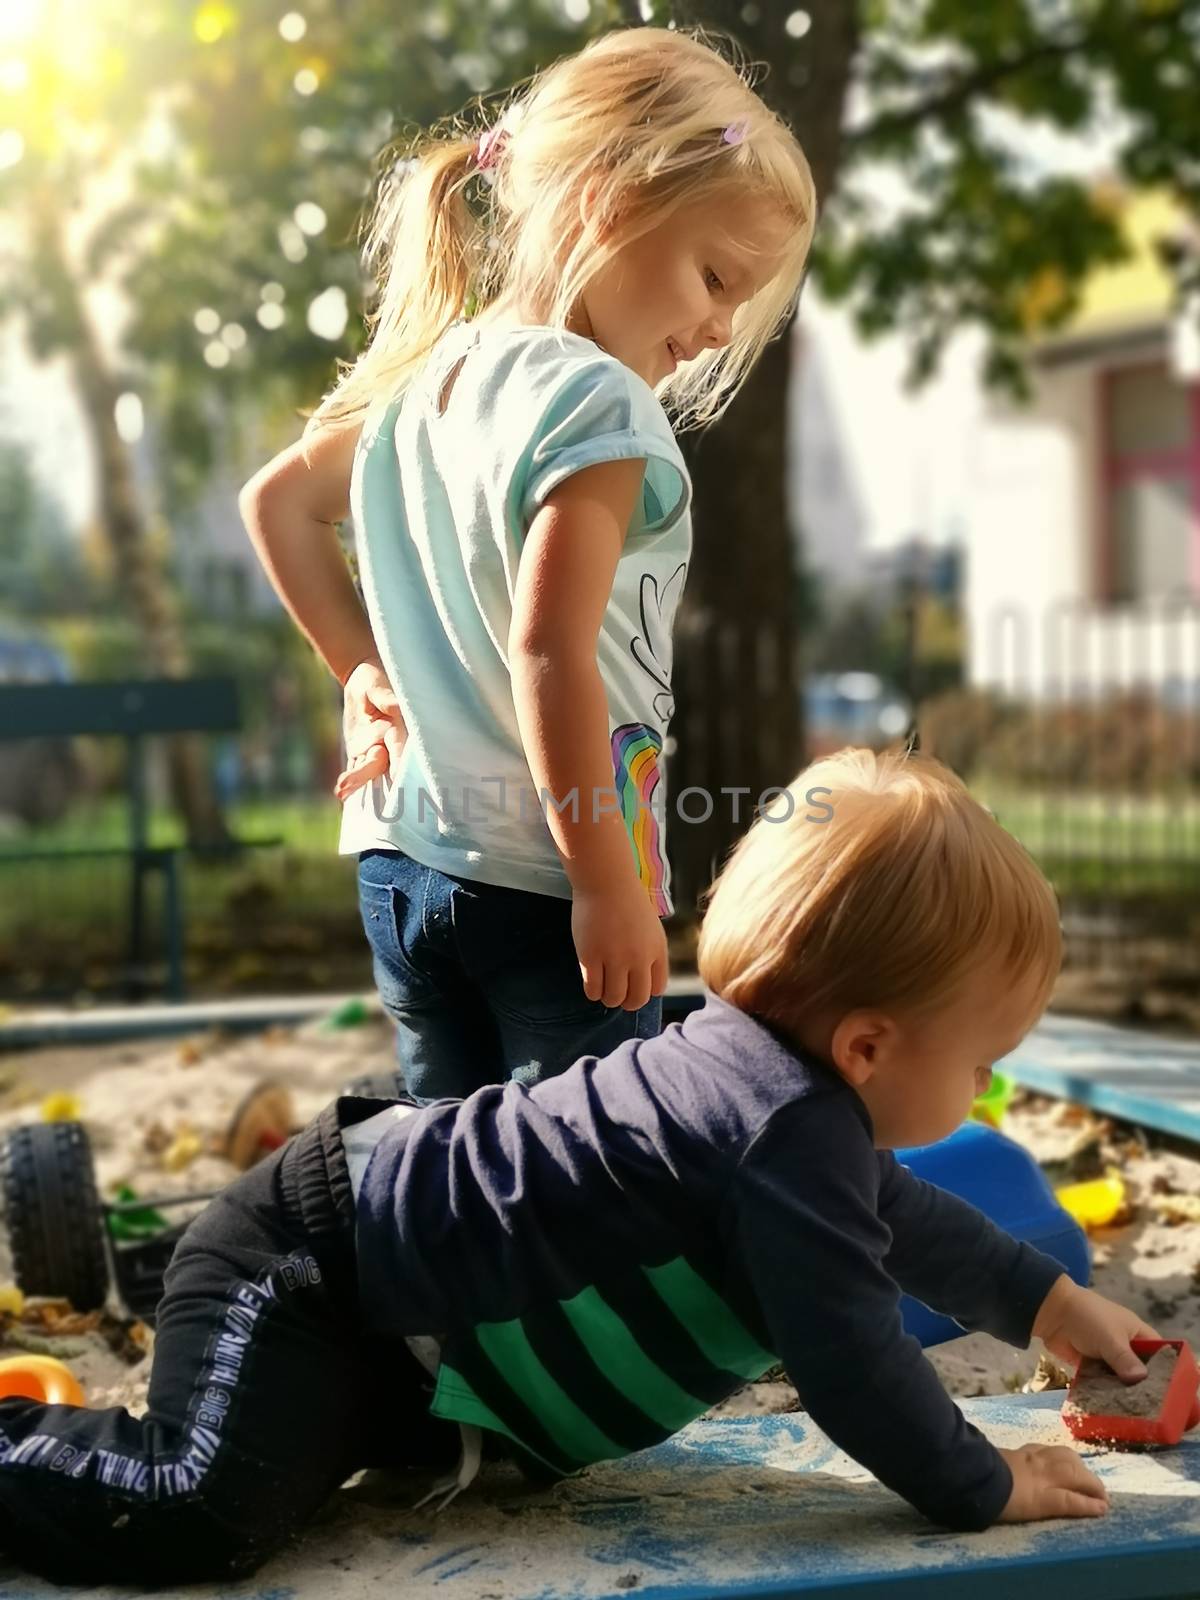 Sister and brother playing with sand. Adorable little kids family related in sandbox on playground. Happiness of play together outside. sibling leisure activity. older girl child looking after boy.